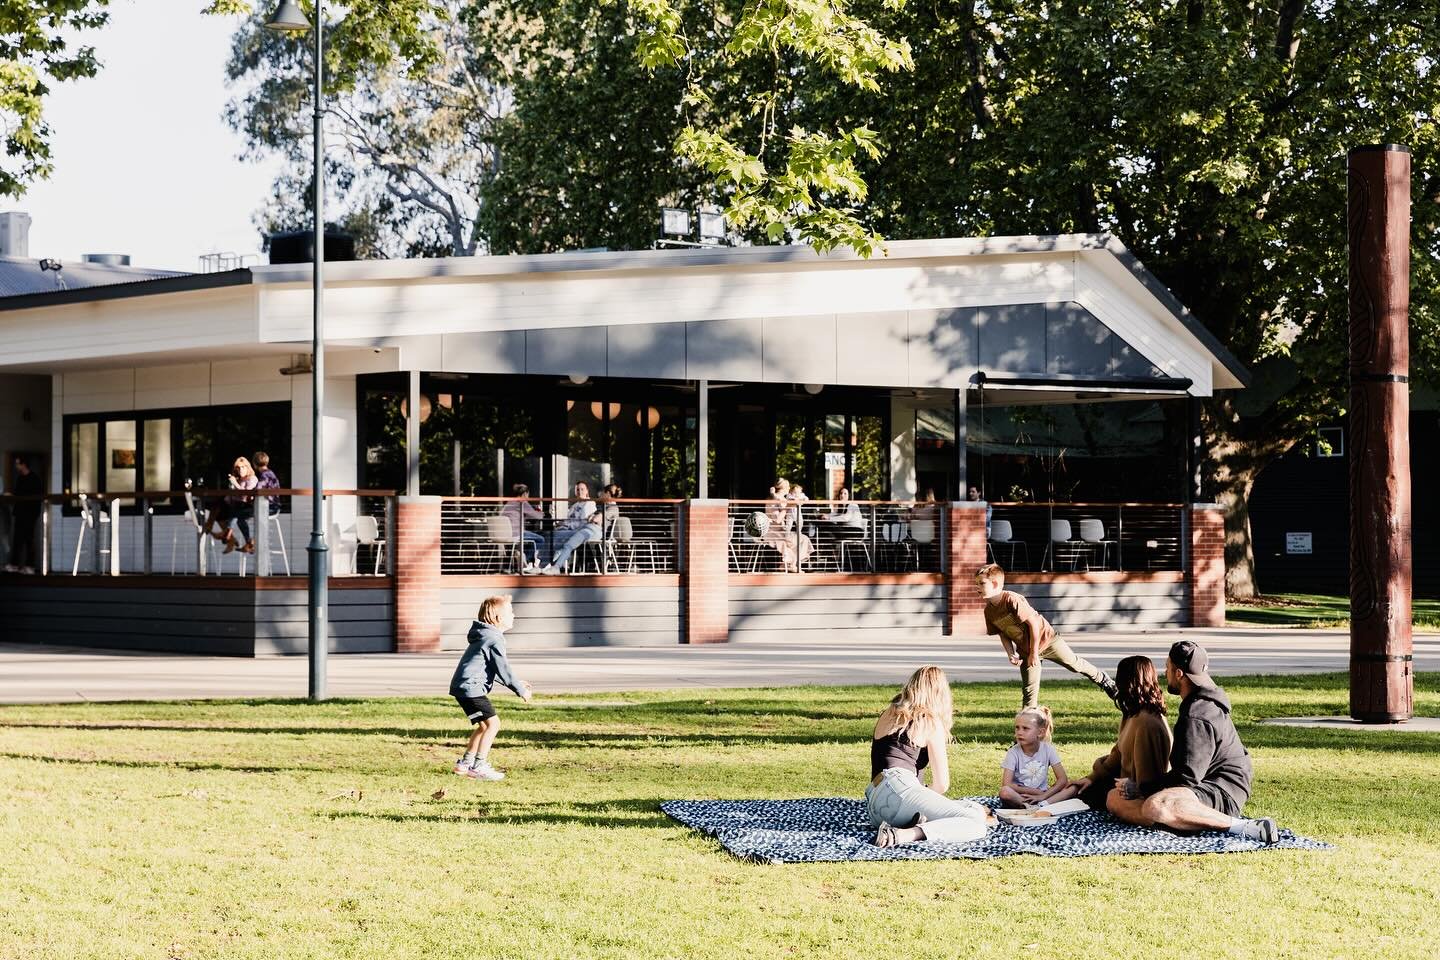 Come down and enjoy the beautiful weather while it lasts! 

As long as the sun is out, it&rsquo;s still picnic season ☀️

Pack the picnic rug and select your favourites from our takeaway menu.